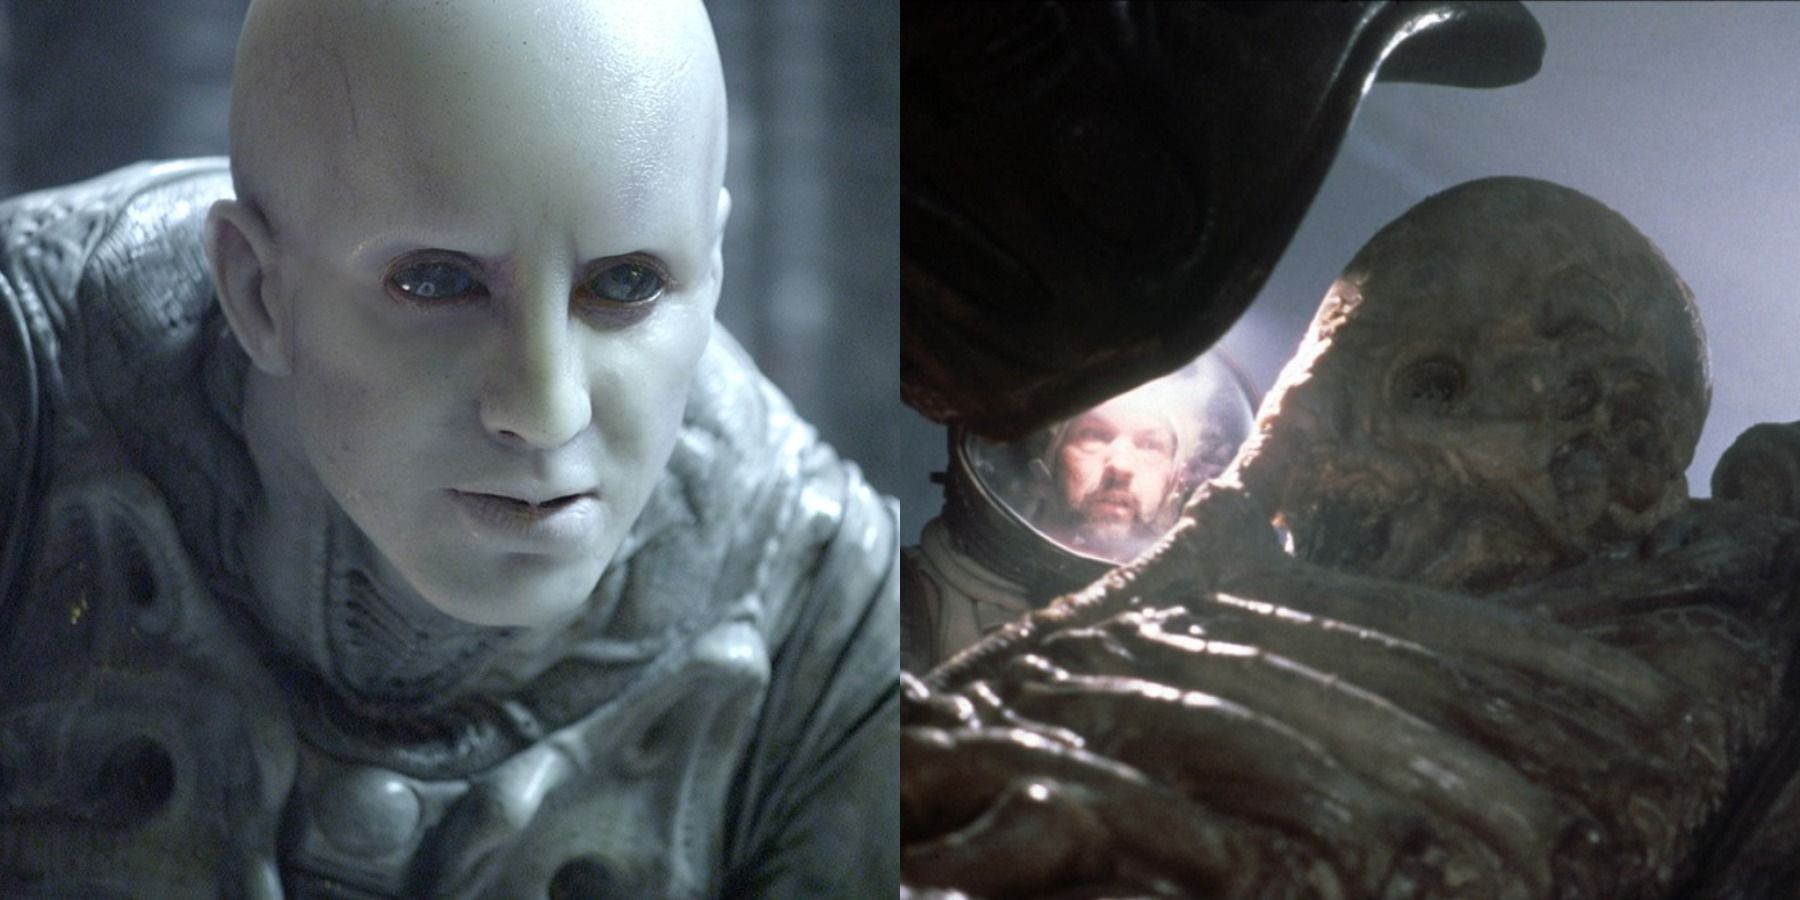 Split image of an Engineer from Prometheus and the Space Jockey in Alien